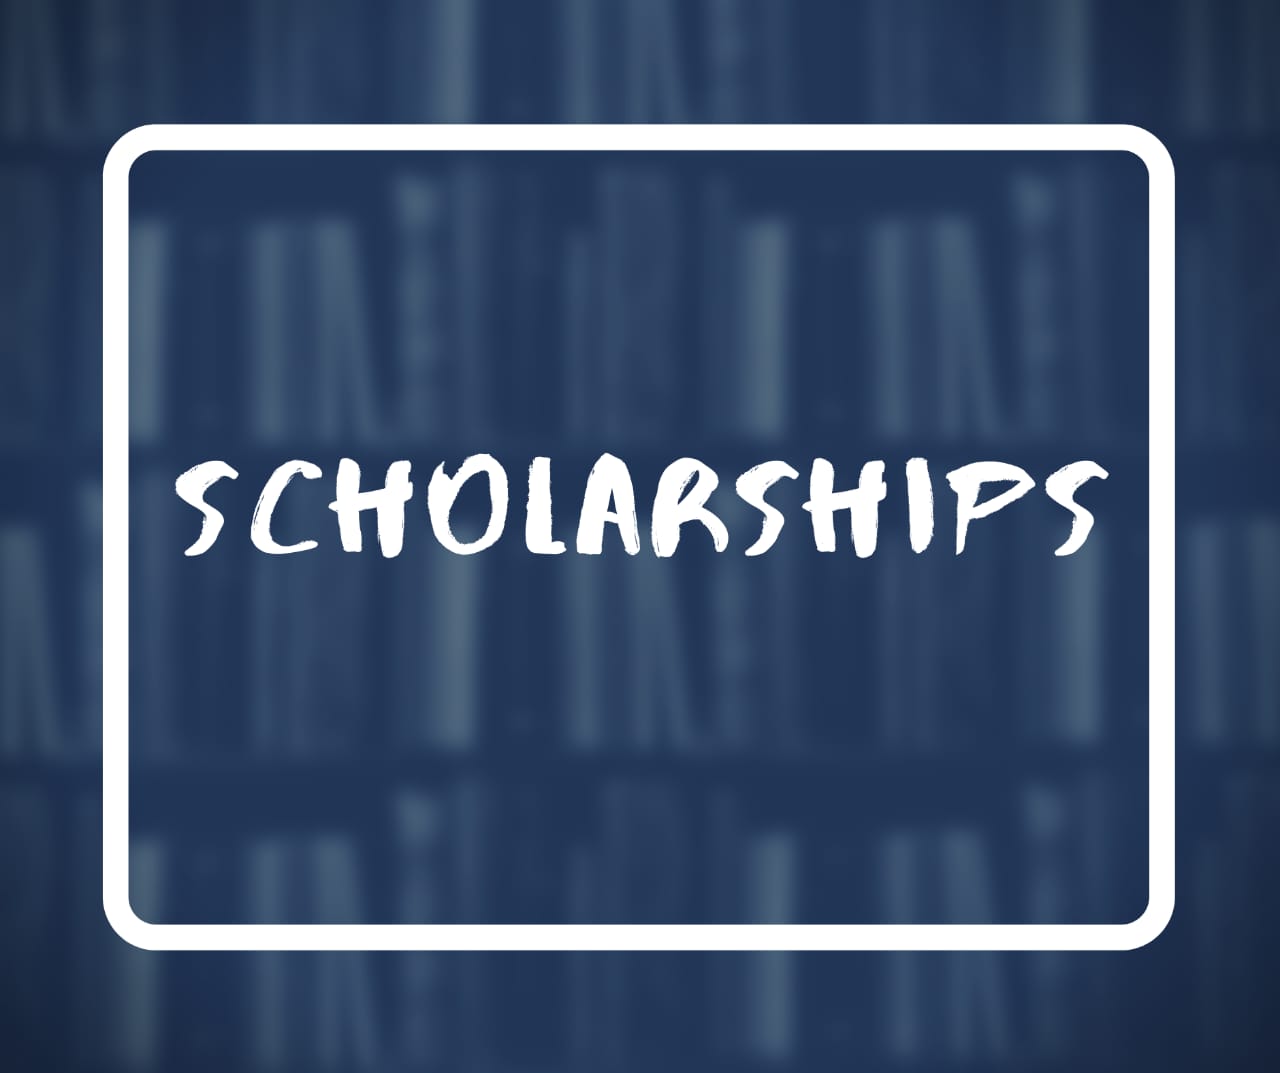 Scholarship opportunity | Apply now!